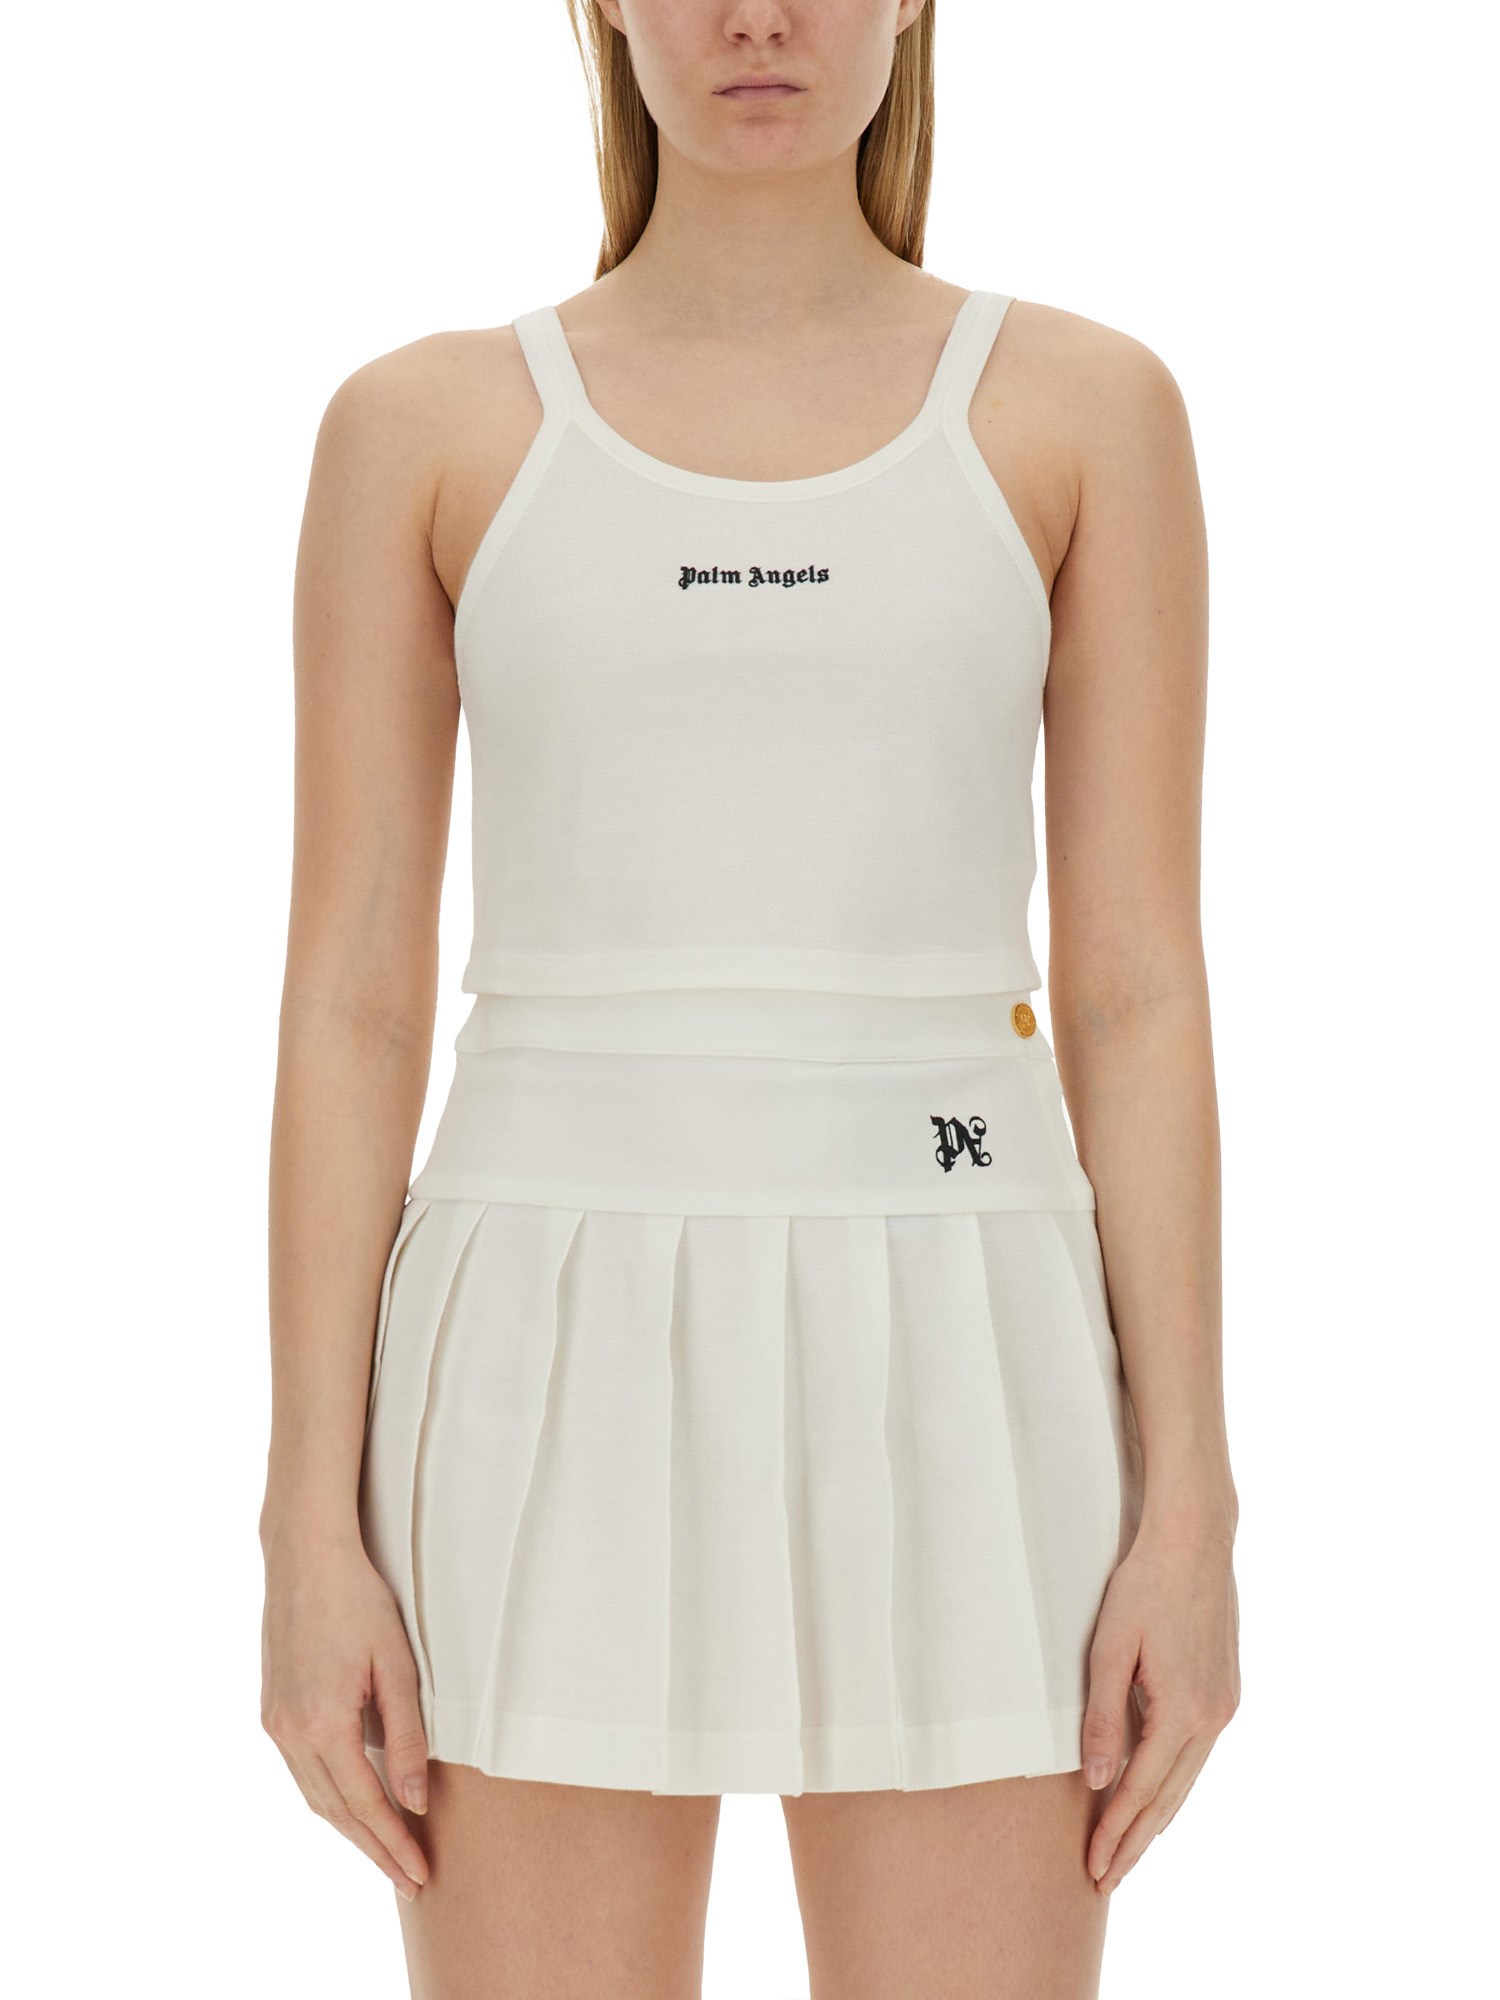 palm angels tank top with logo